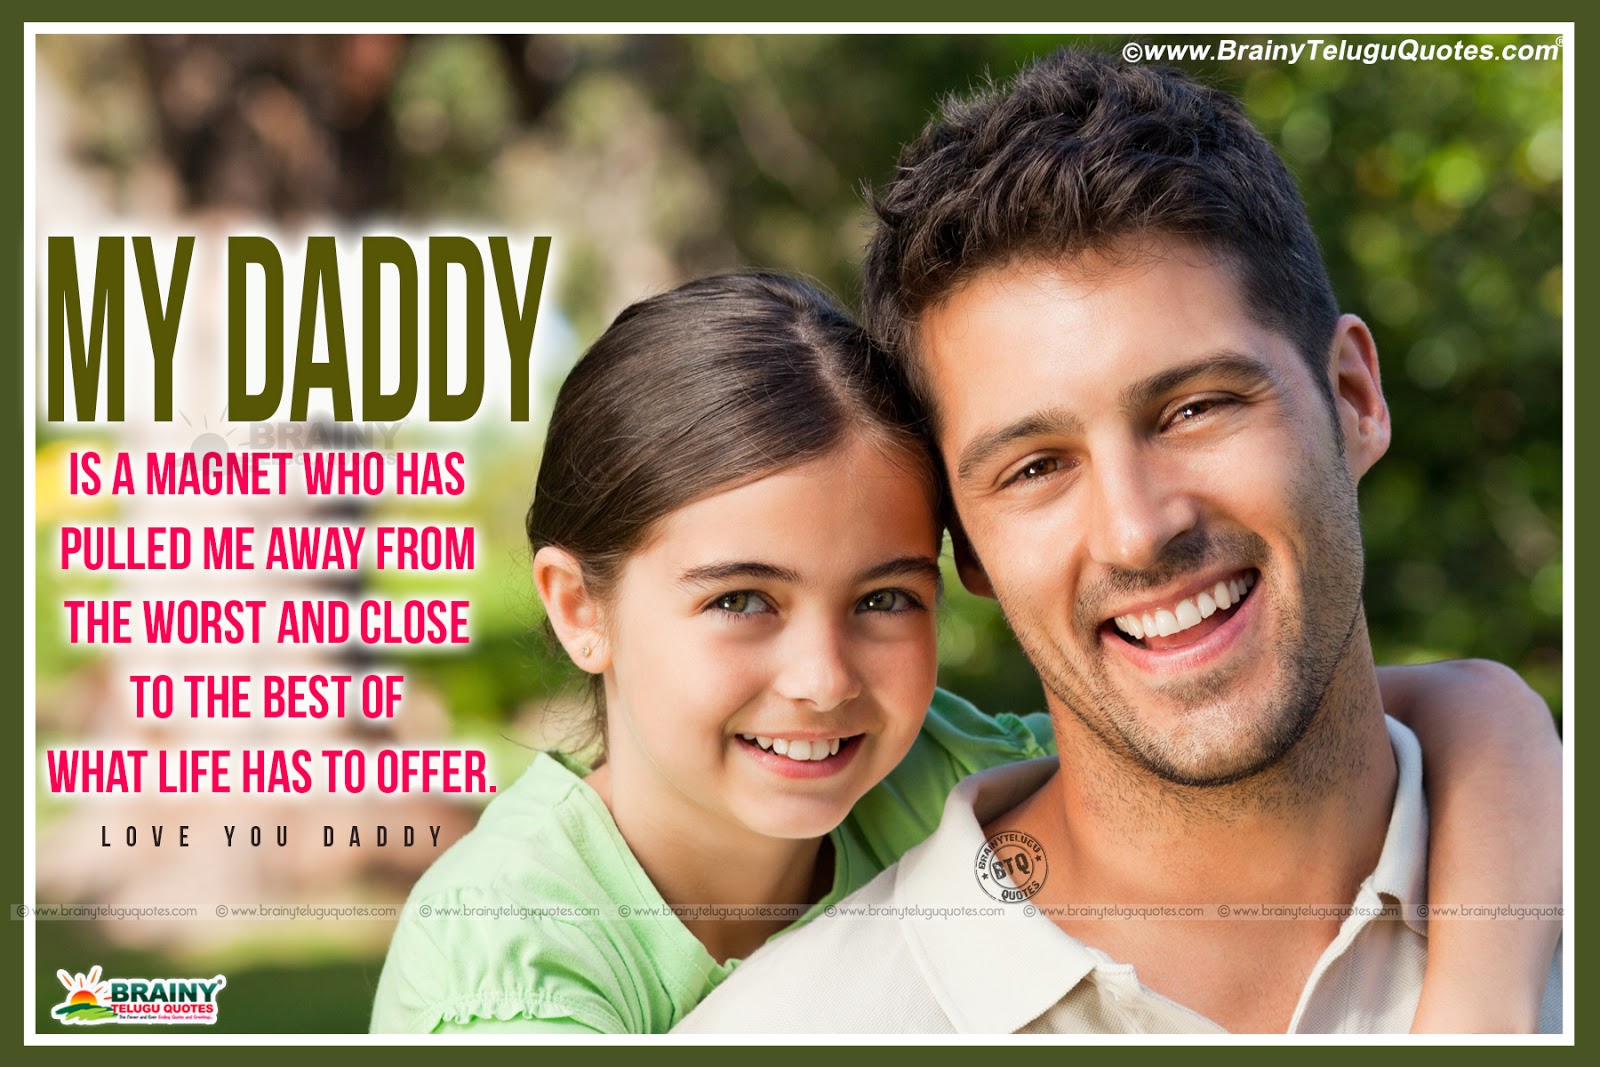 dad and daughter quotes wallpaper, skin, smile, friendship, forehead, happy, photography, tooth, photo caption, love, advertising